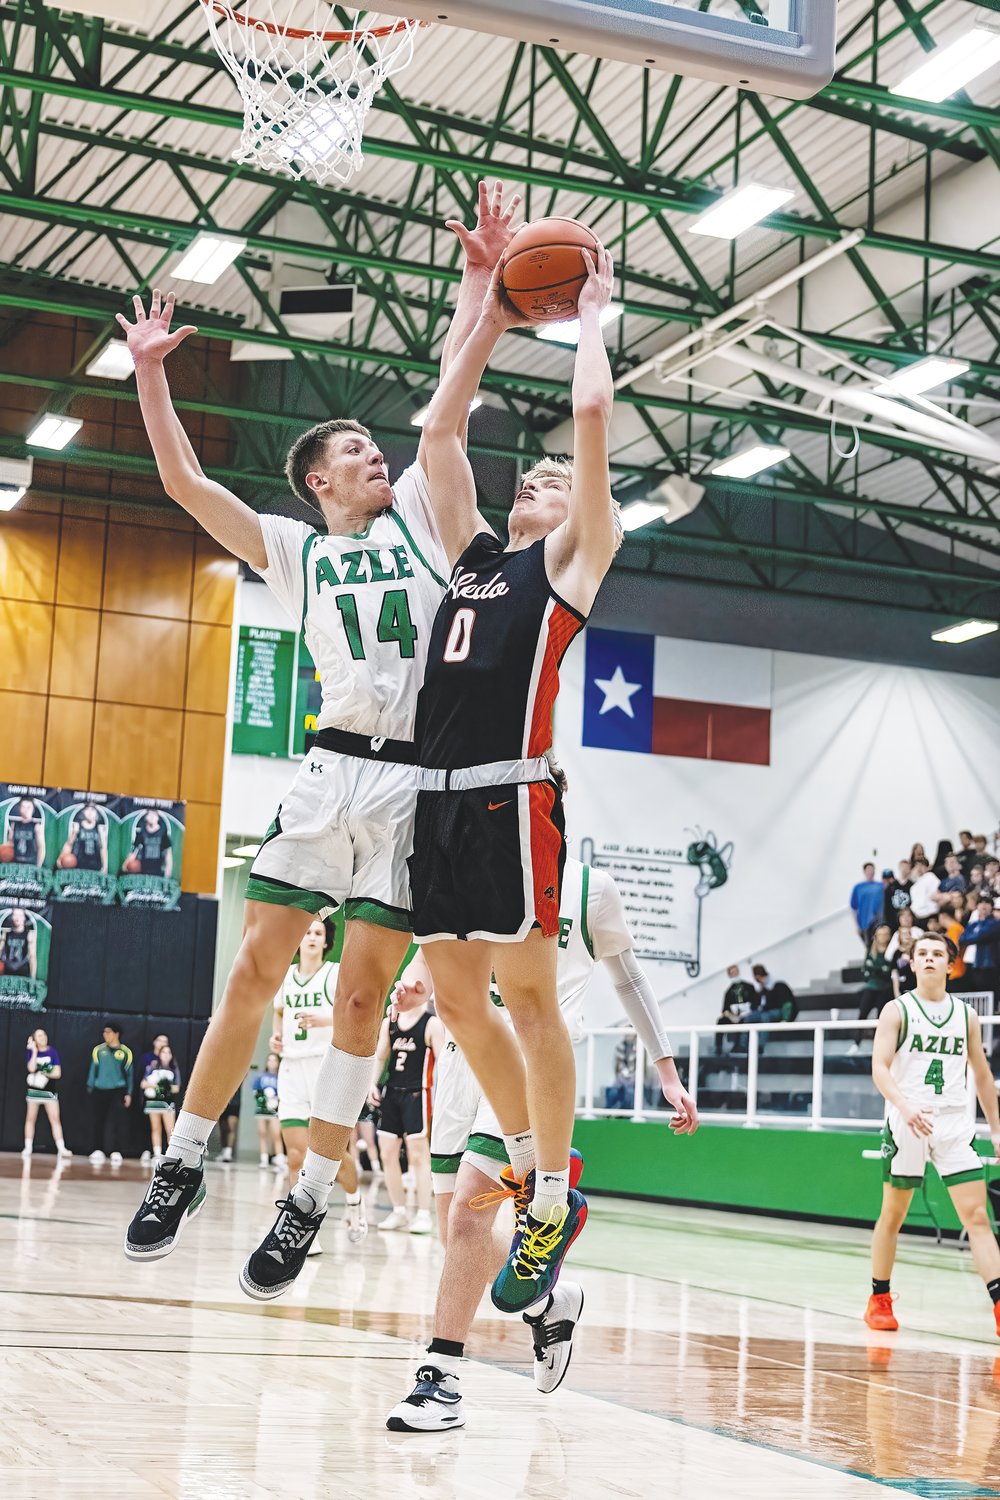 Drew Clock goes to the basket against Azle. Clock had 21 points in the game.